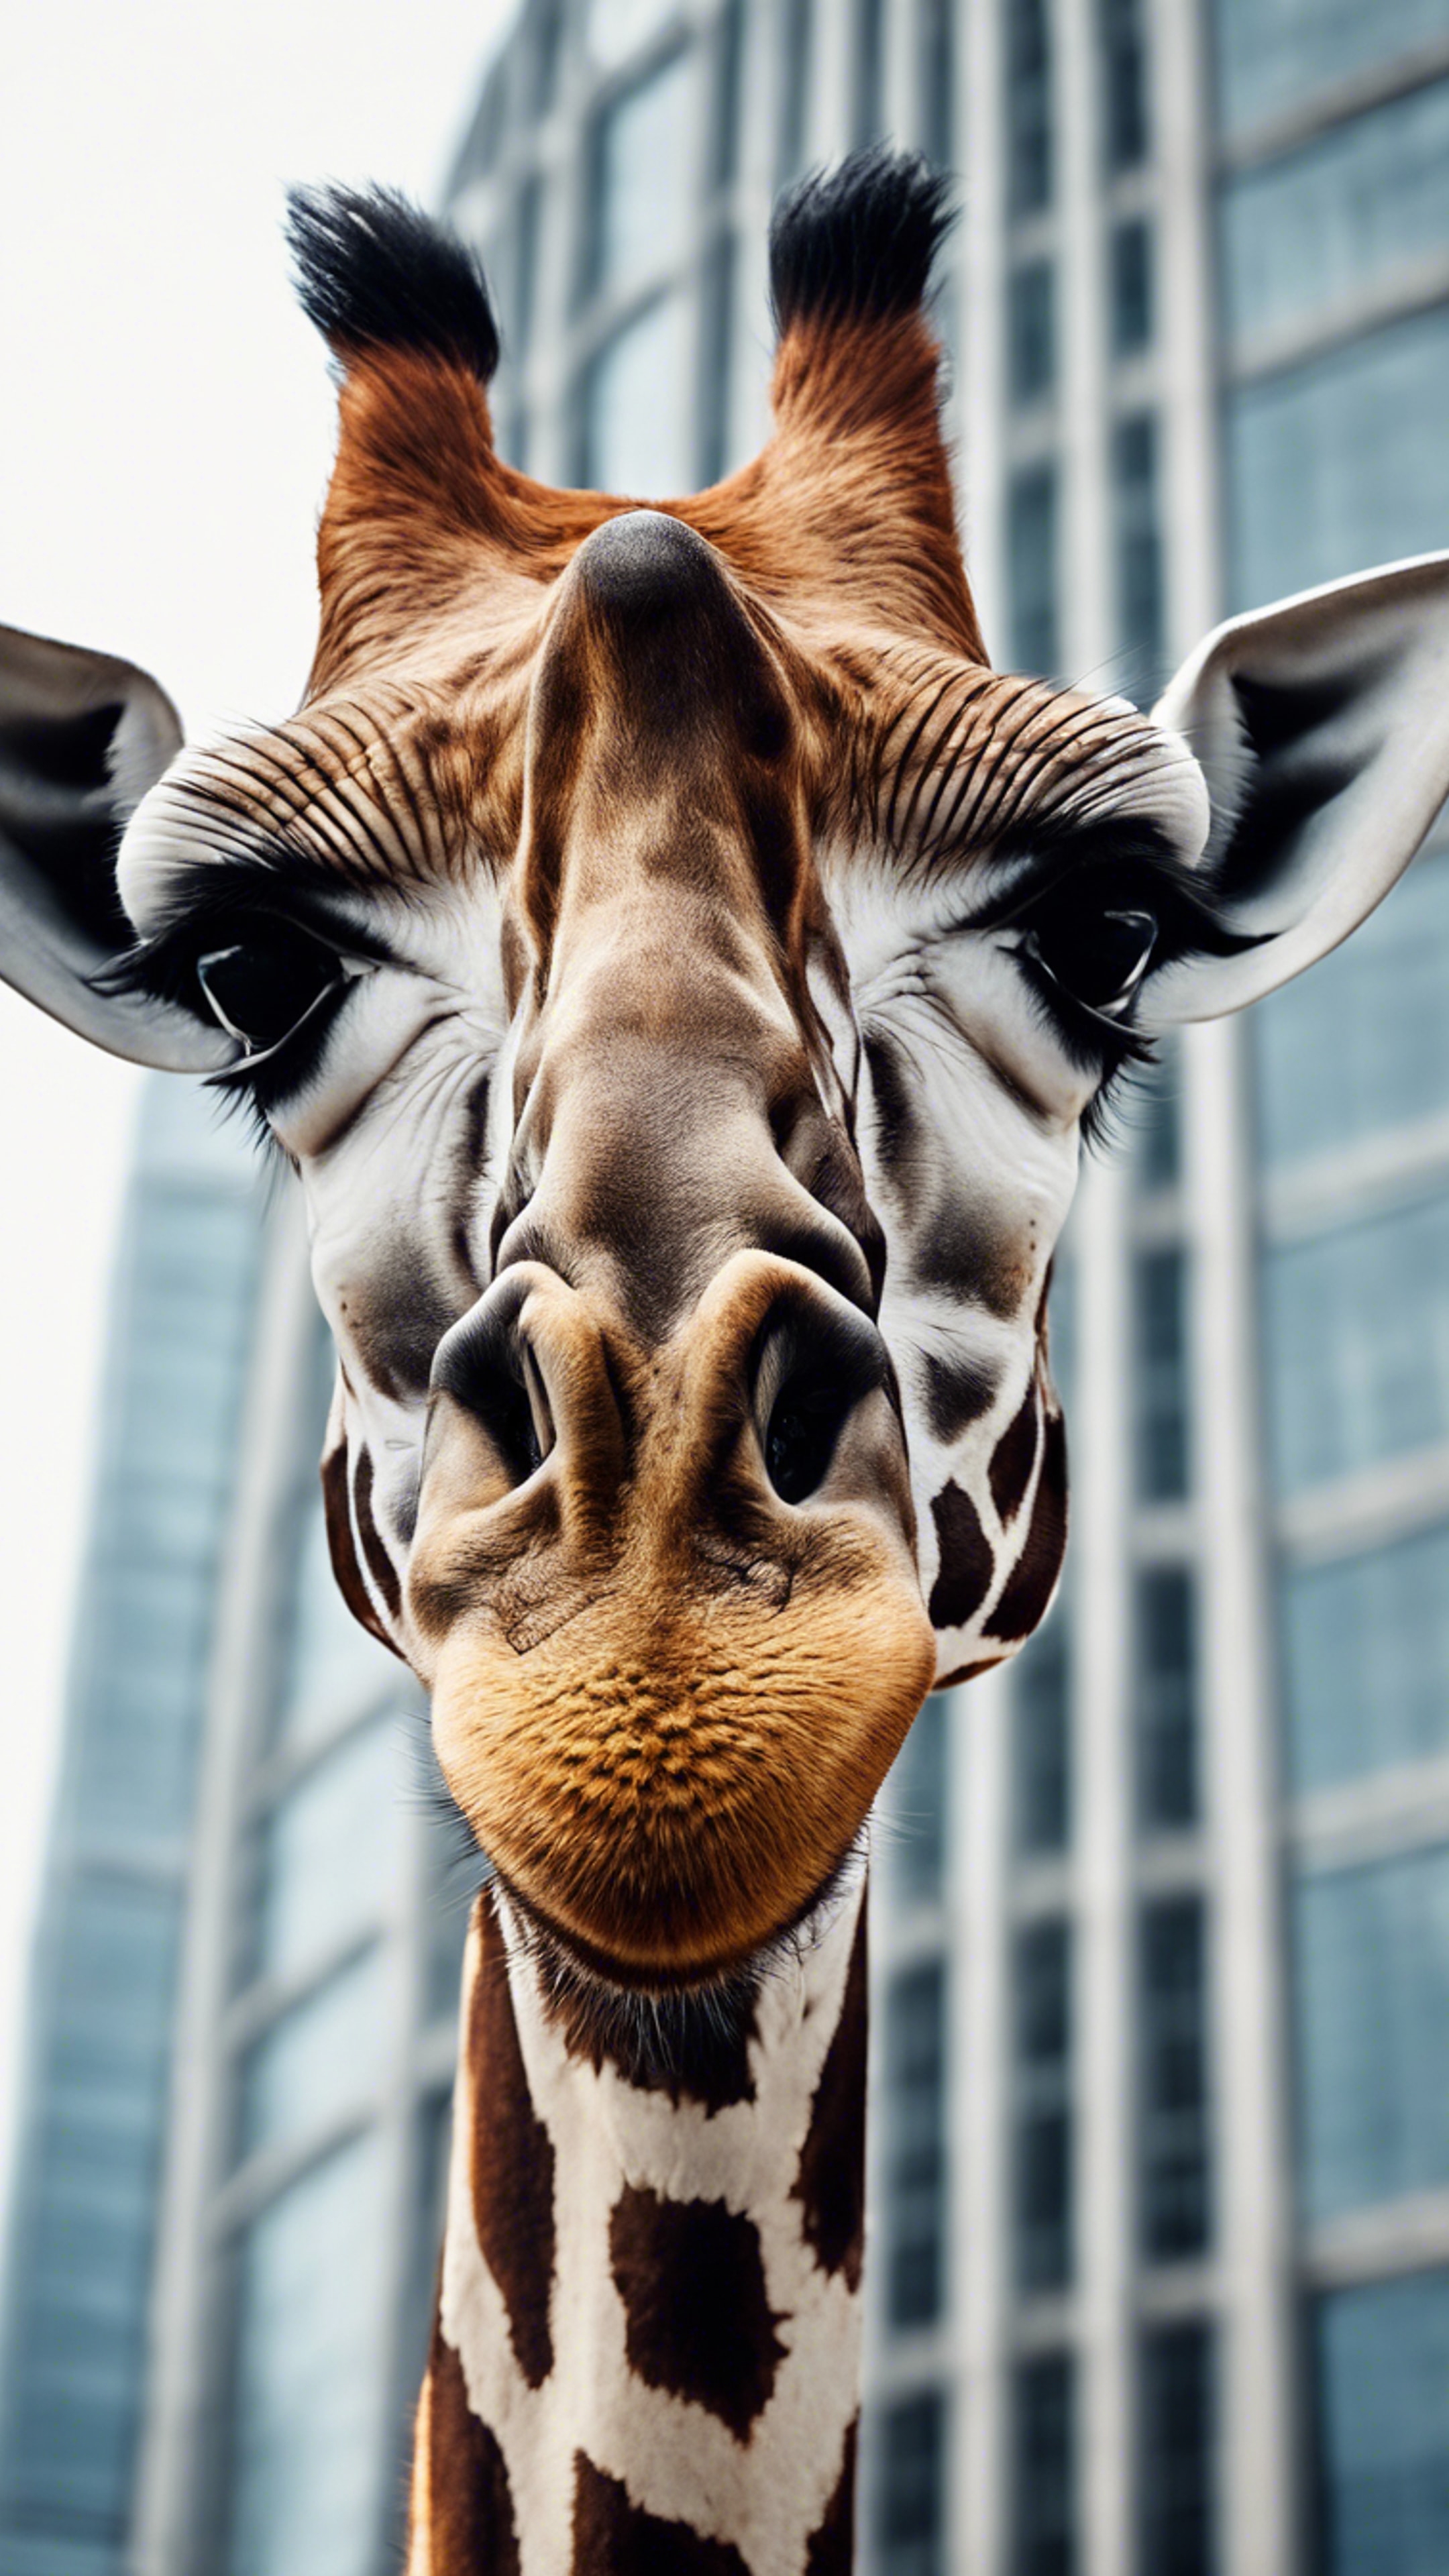 A giraffe in an urban setting, poking its head out from behind a skyscraper, symbolising wild nature confronting urbanisation. Tapeta[4646bbcdc786429d9f19]